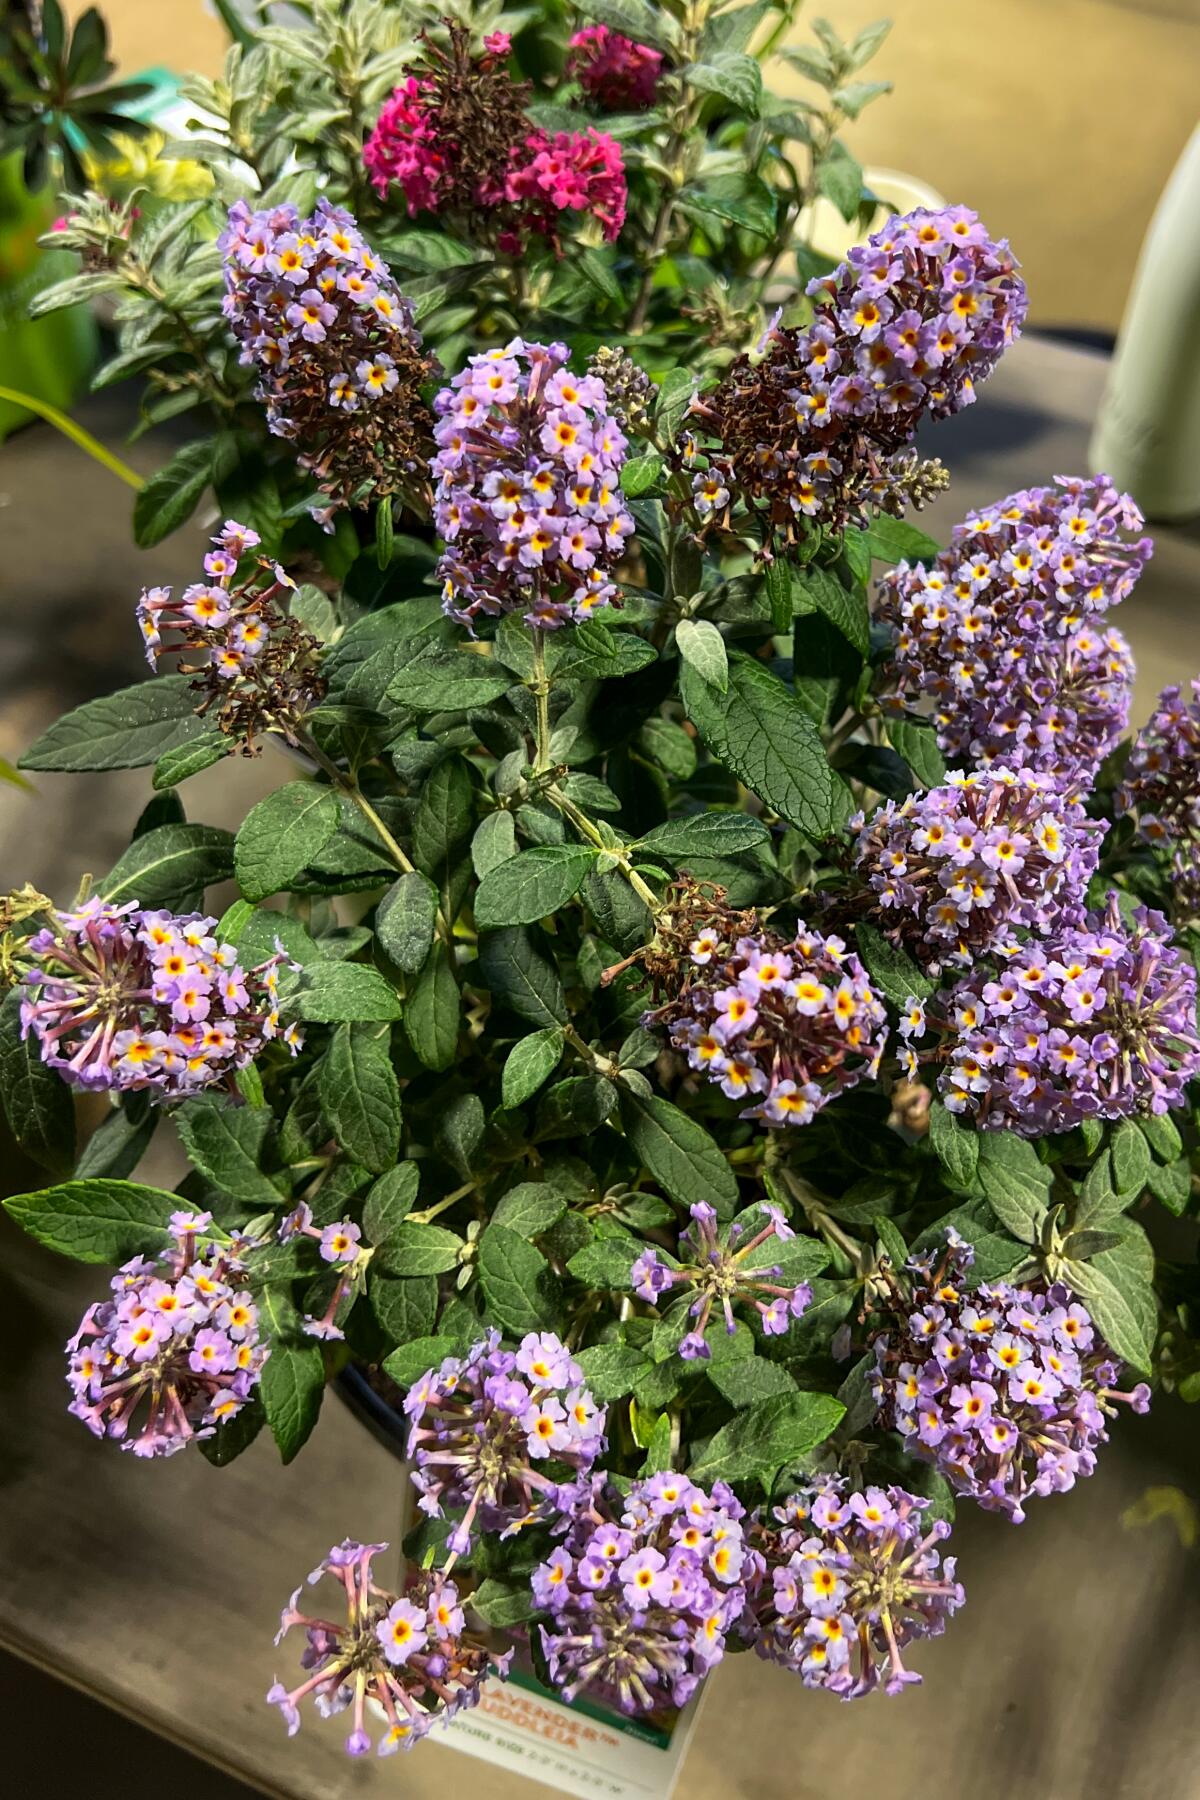 A small plant covered with violet puffy blooms